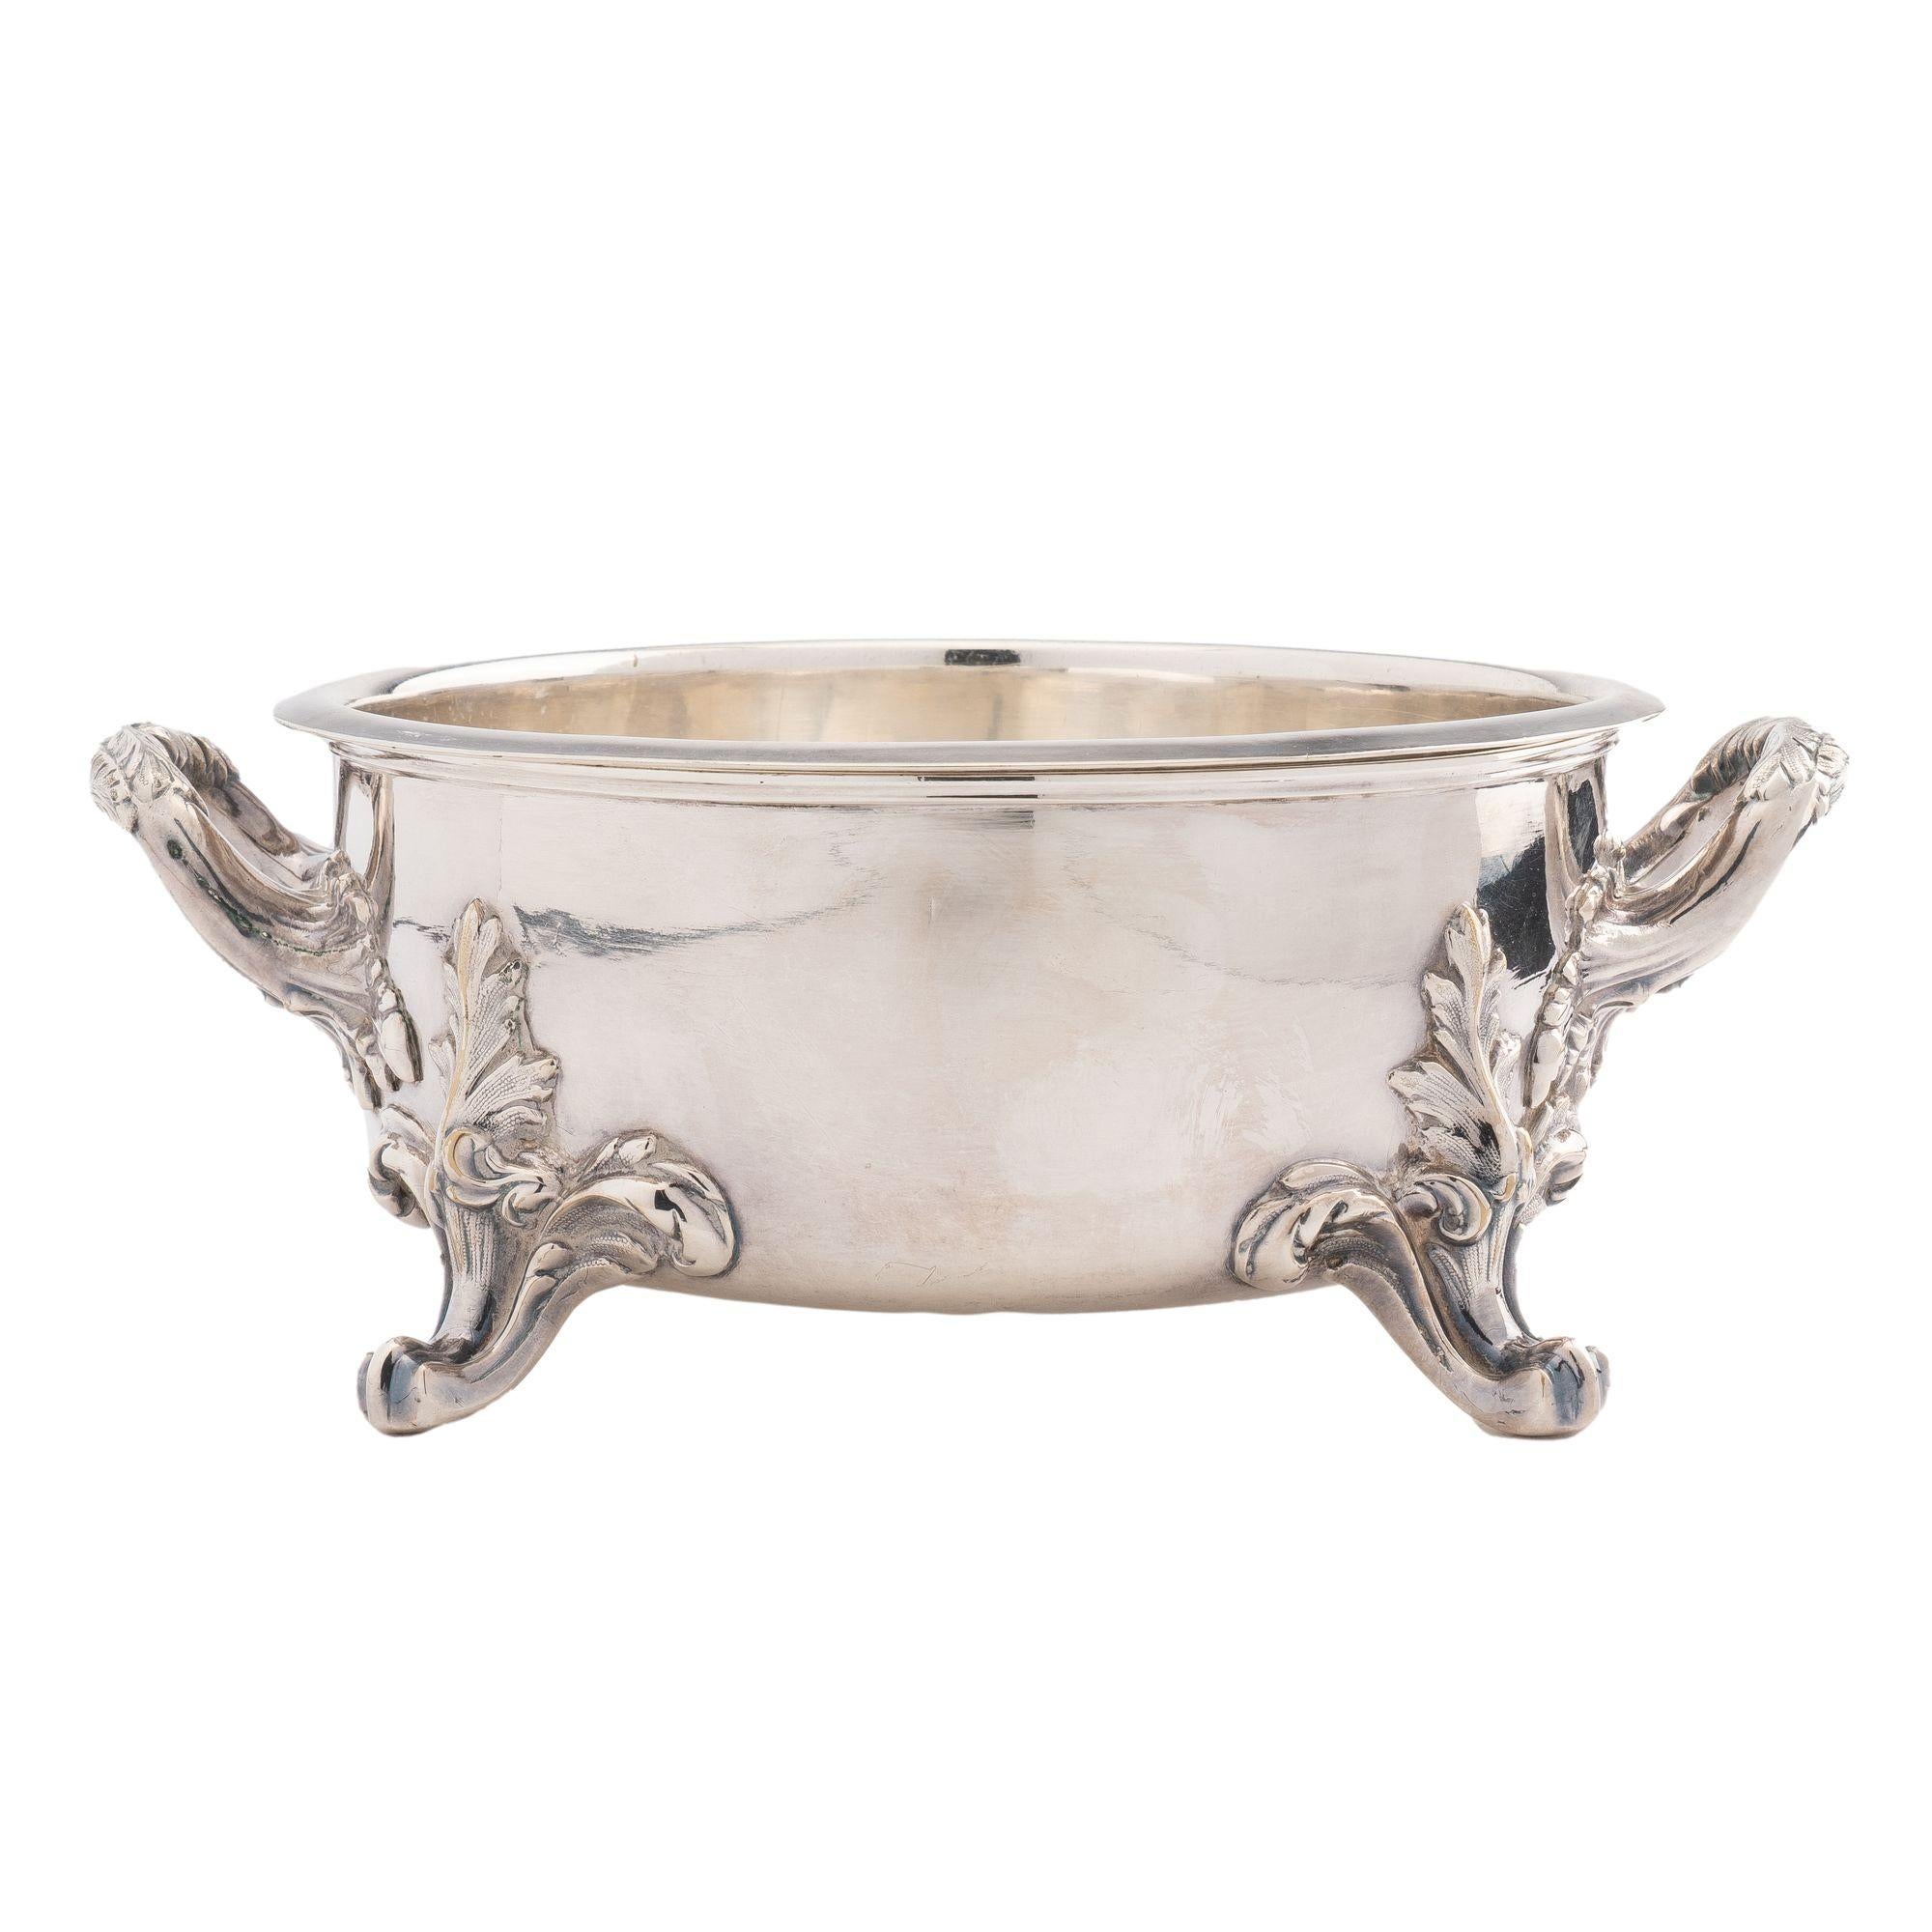 Old Sheffield flat bottomed cylindrical soufflé dish on four foliate, cast scroll feet, and applied cast foliate scroll handles. The bowl is fitted with a removable and flared rim liner.
Impressed on the underside with the 